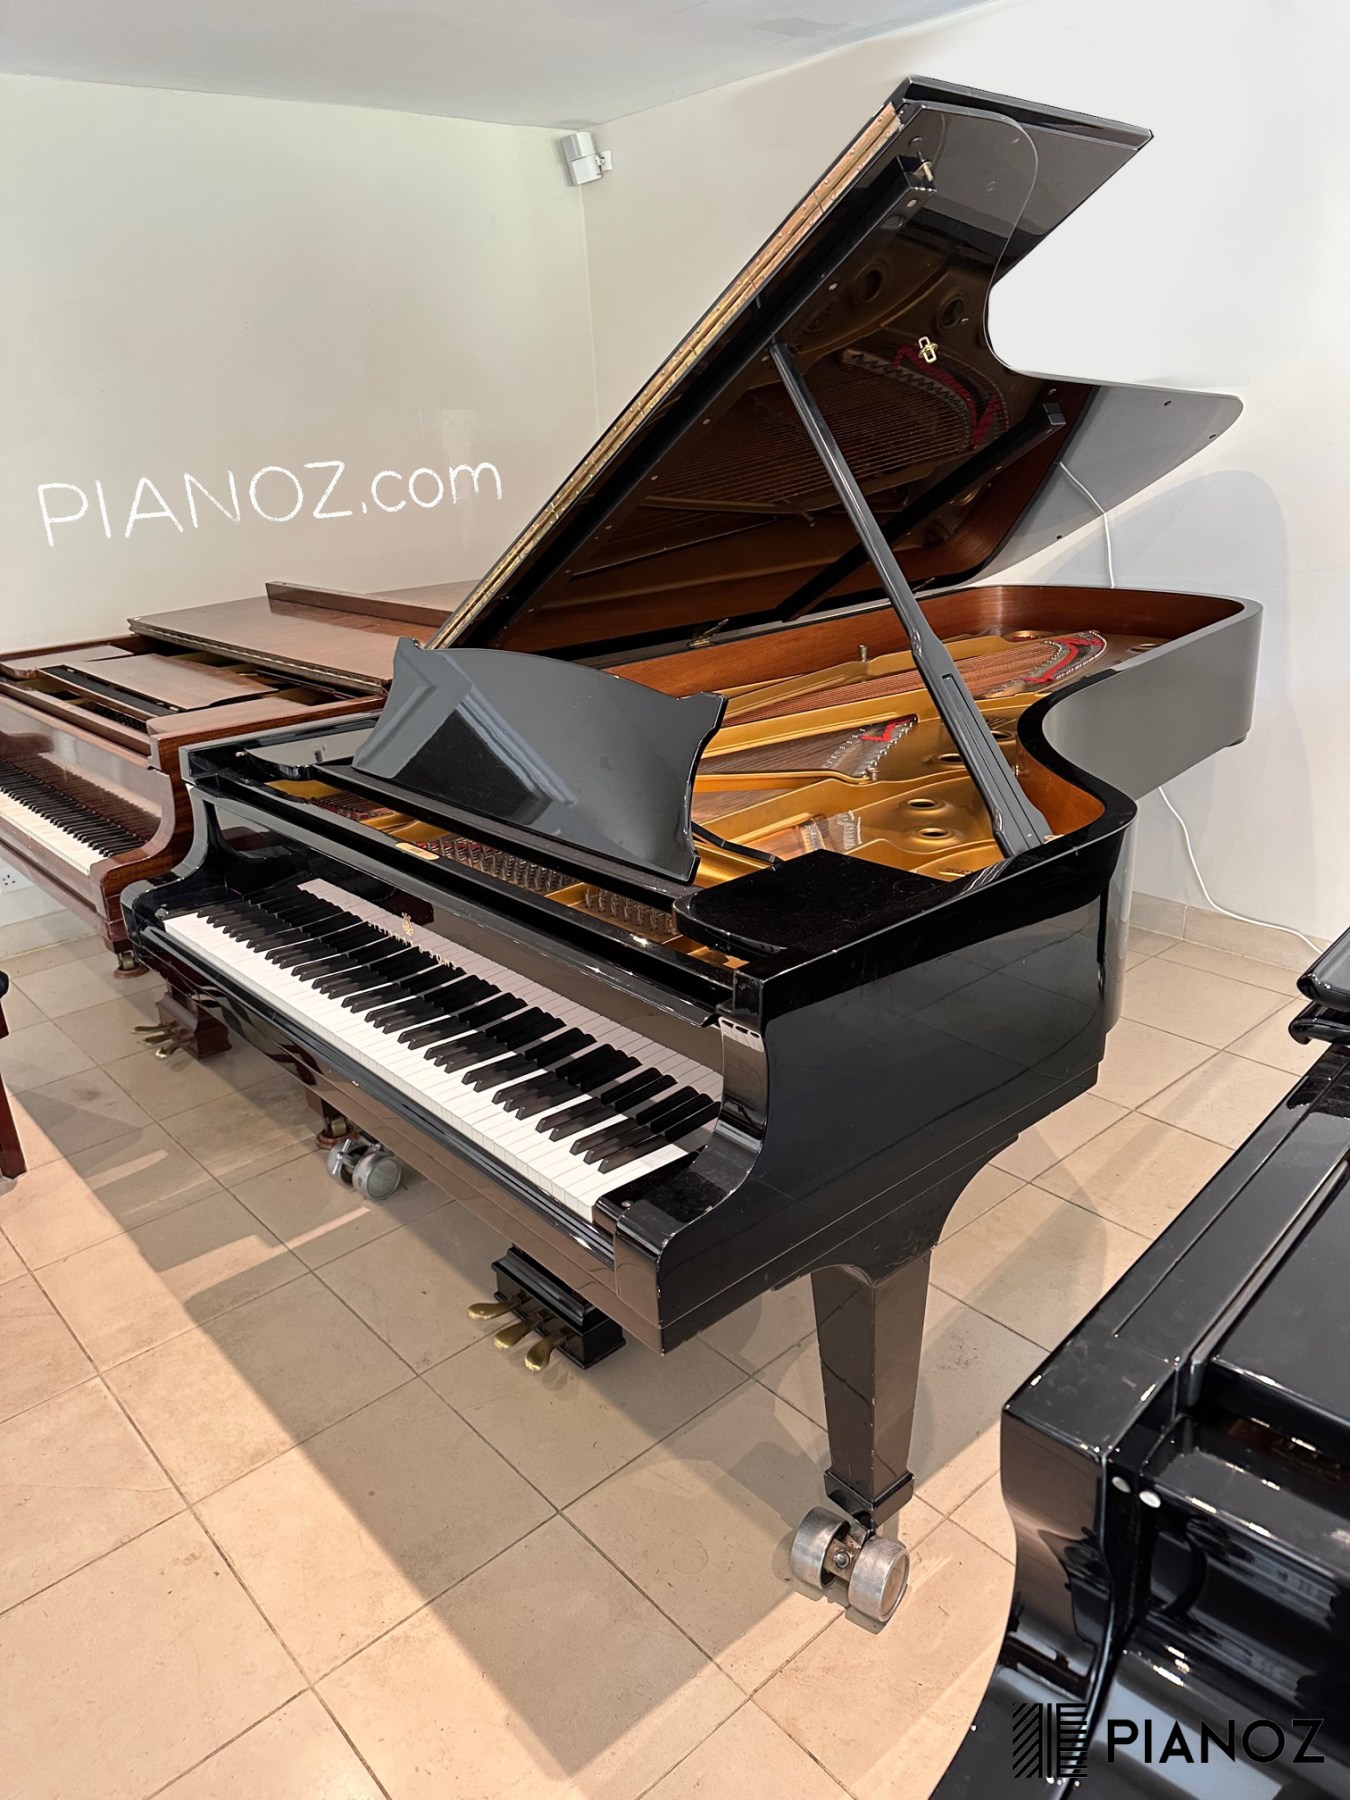 Steinway & Sons Model D 1975 Concert Grand piano for sale in UK